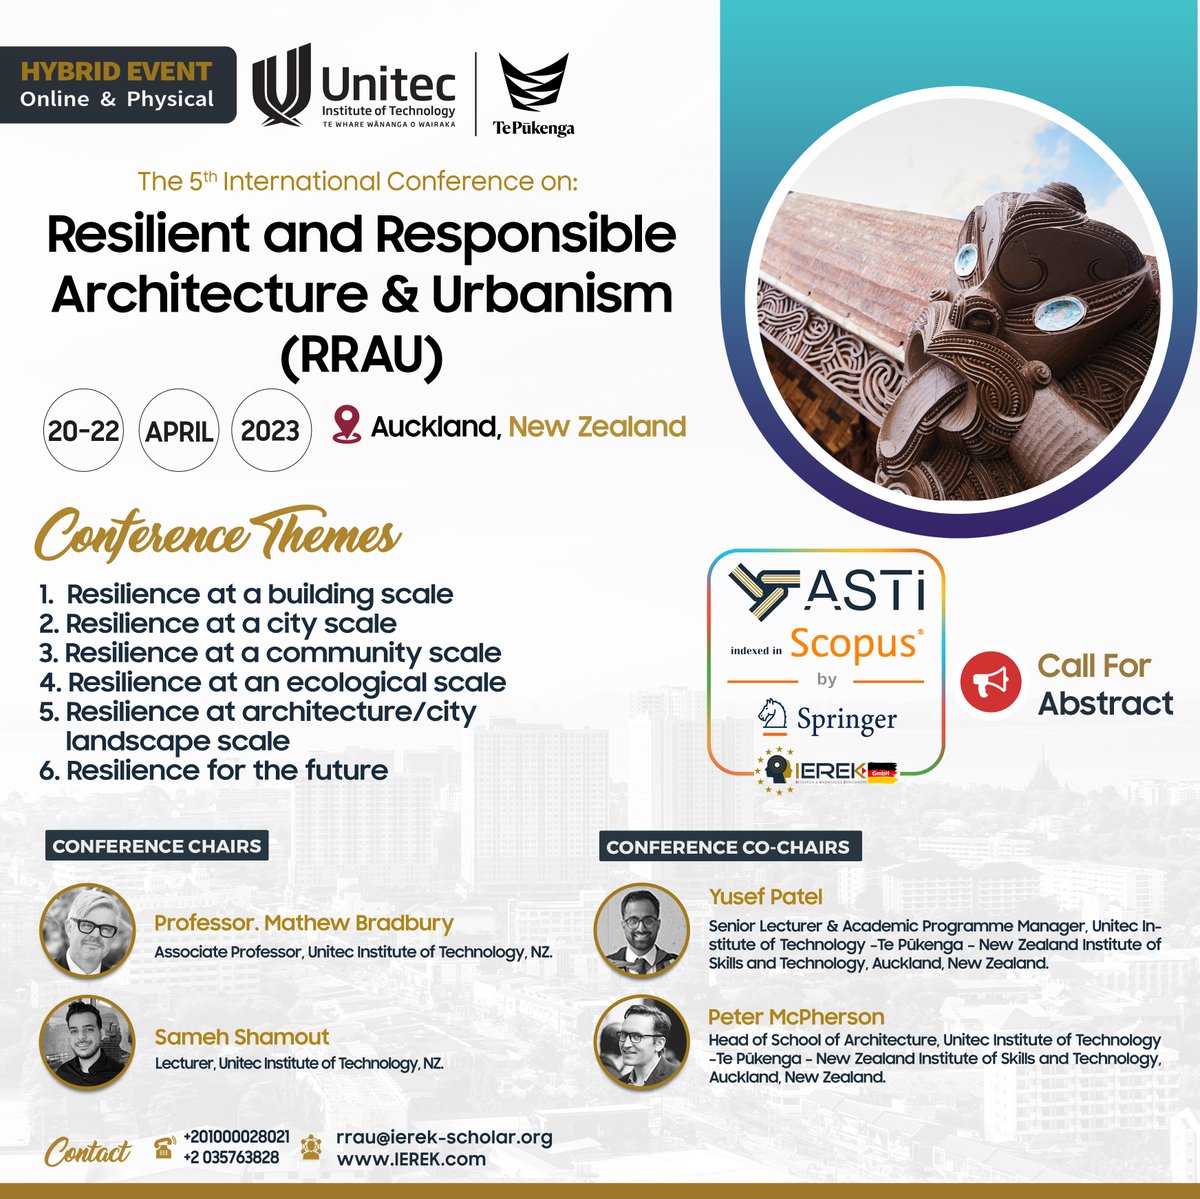 #CallforAbstracts ongoing! @unitecNZ Calendar: rb.gy/fviwxj Abstract submission deadline: 20 March 2023 CPD points: 20.0 Registration at: rb.gy/meqifd #RegisterNOW @SpringerNature #unitecnz #RRAU #resilienceinArchitecture #conference #NewZealand